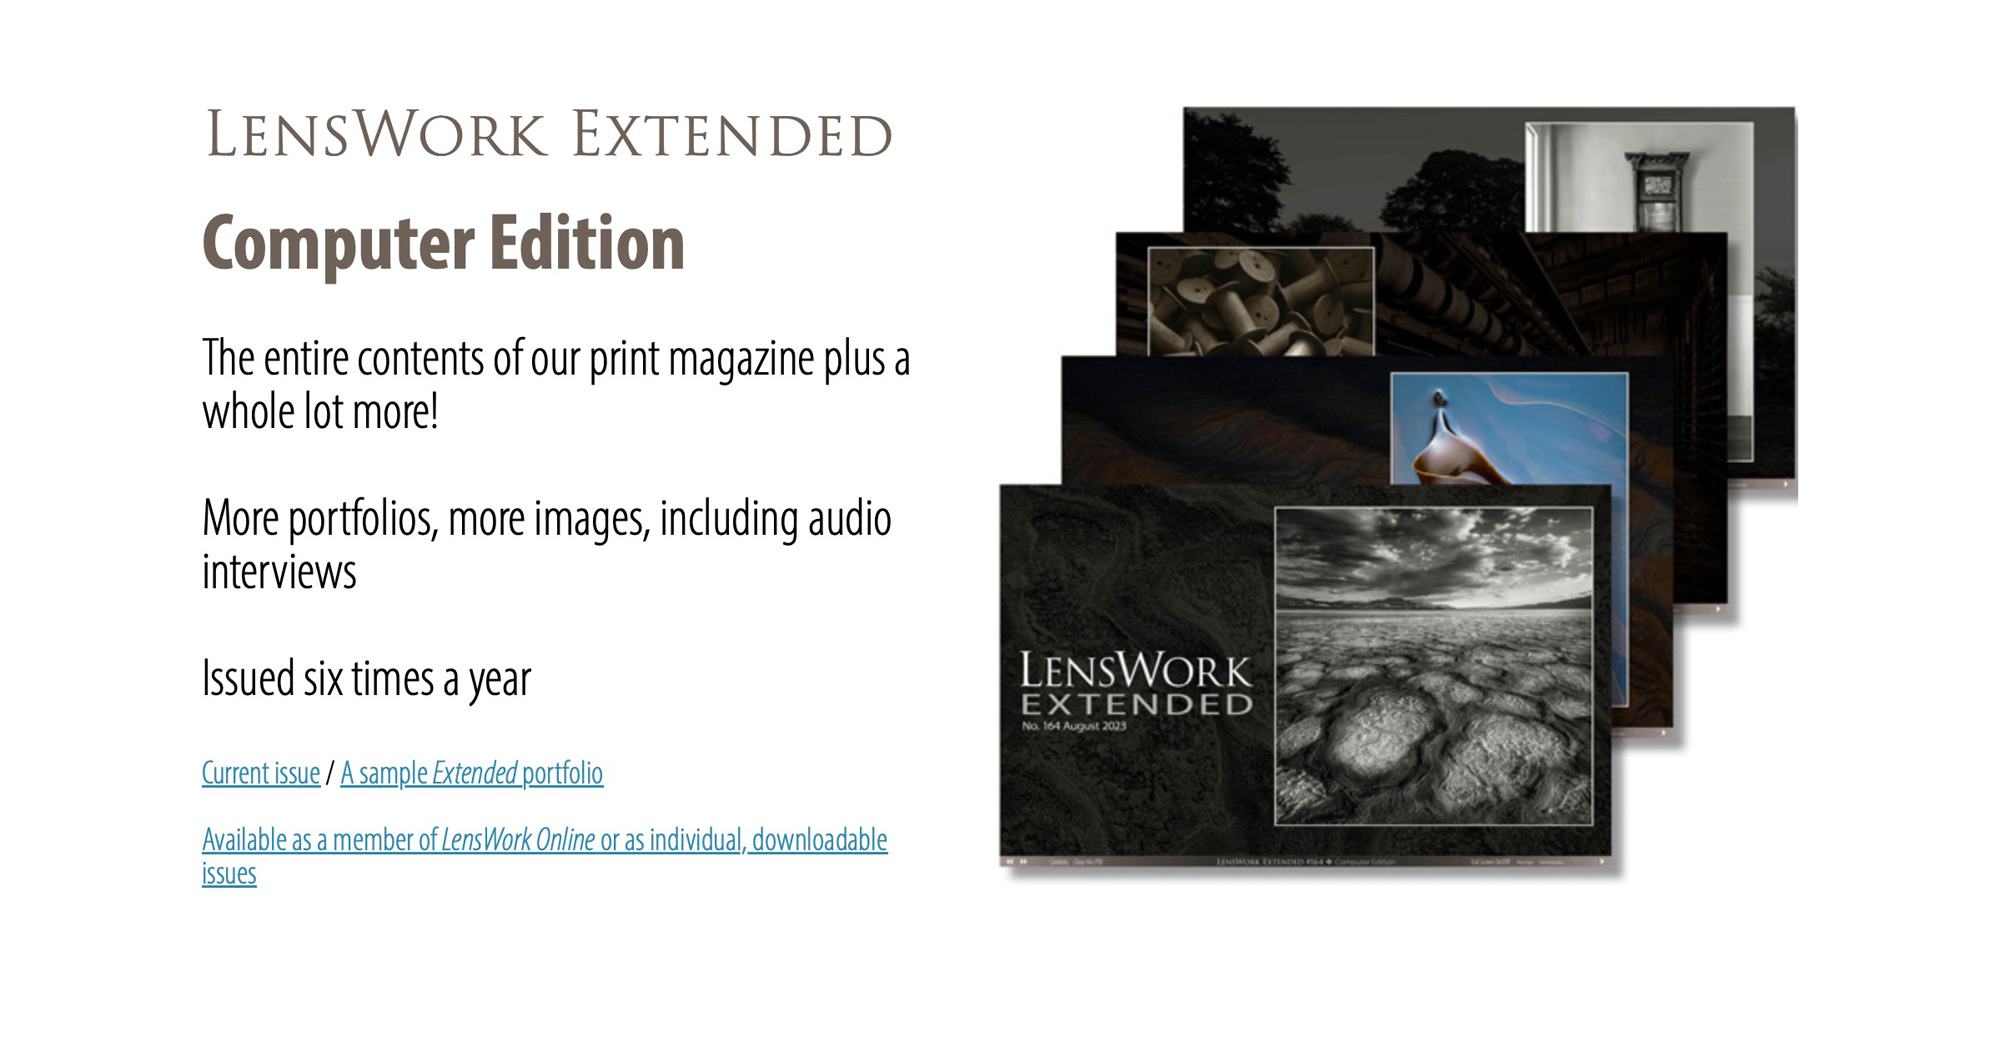 The LensWork website offers many options and one of the best deals available for the yearly subscription price